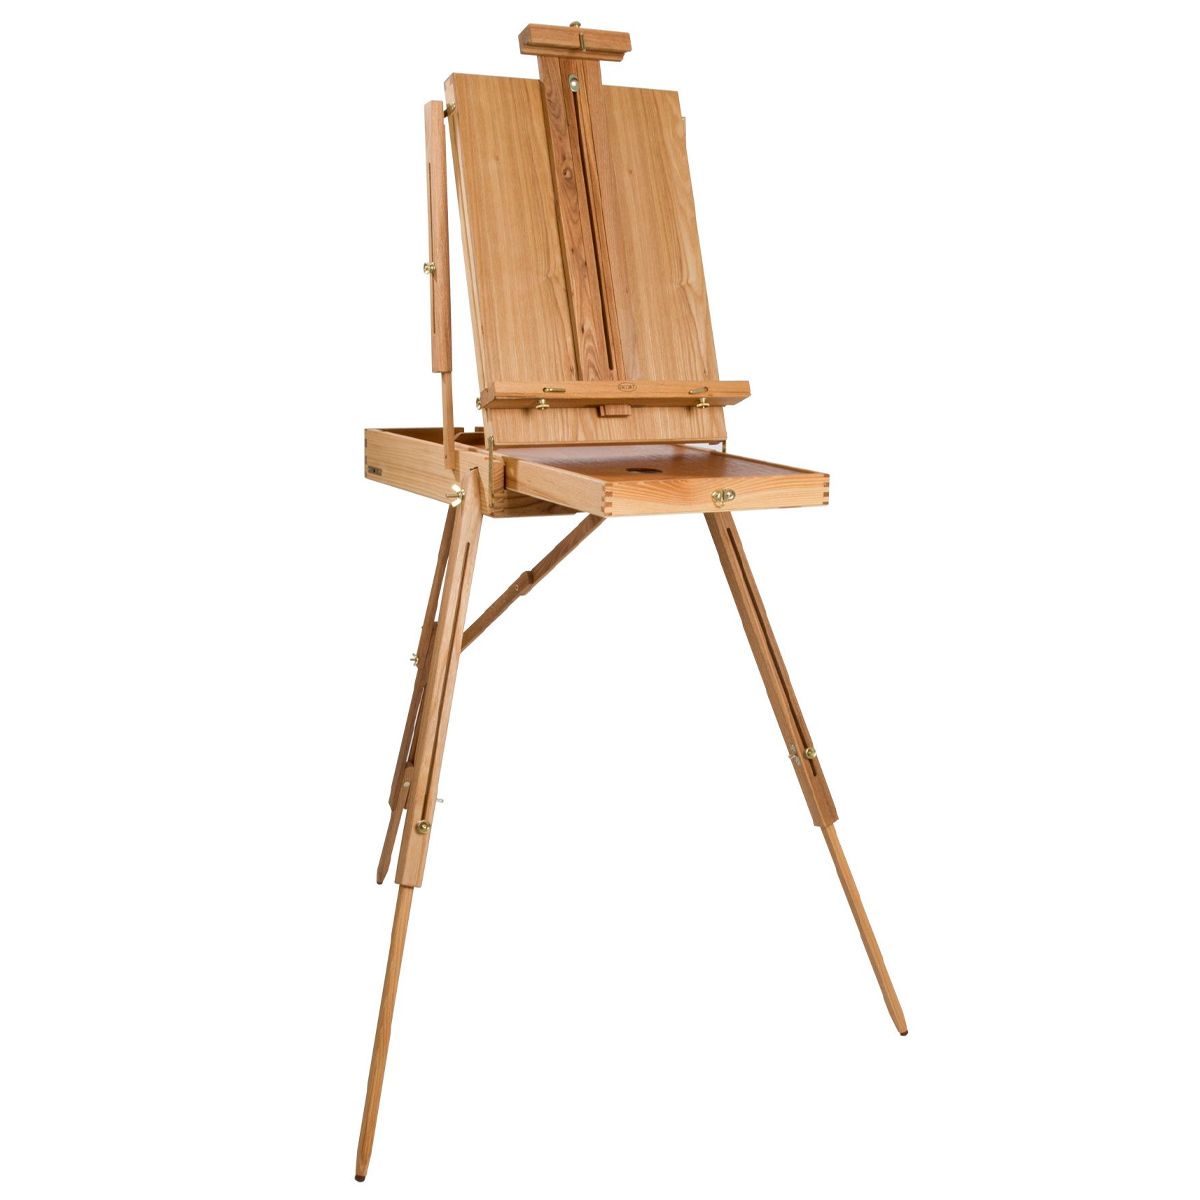 High Quality Affordable French Easel Experience! 